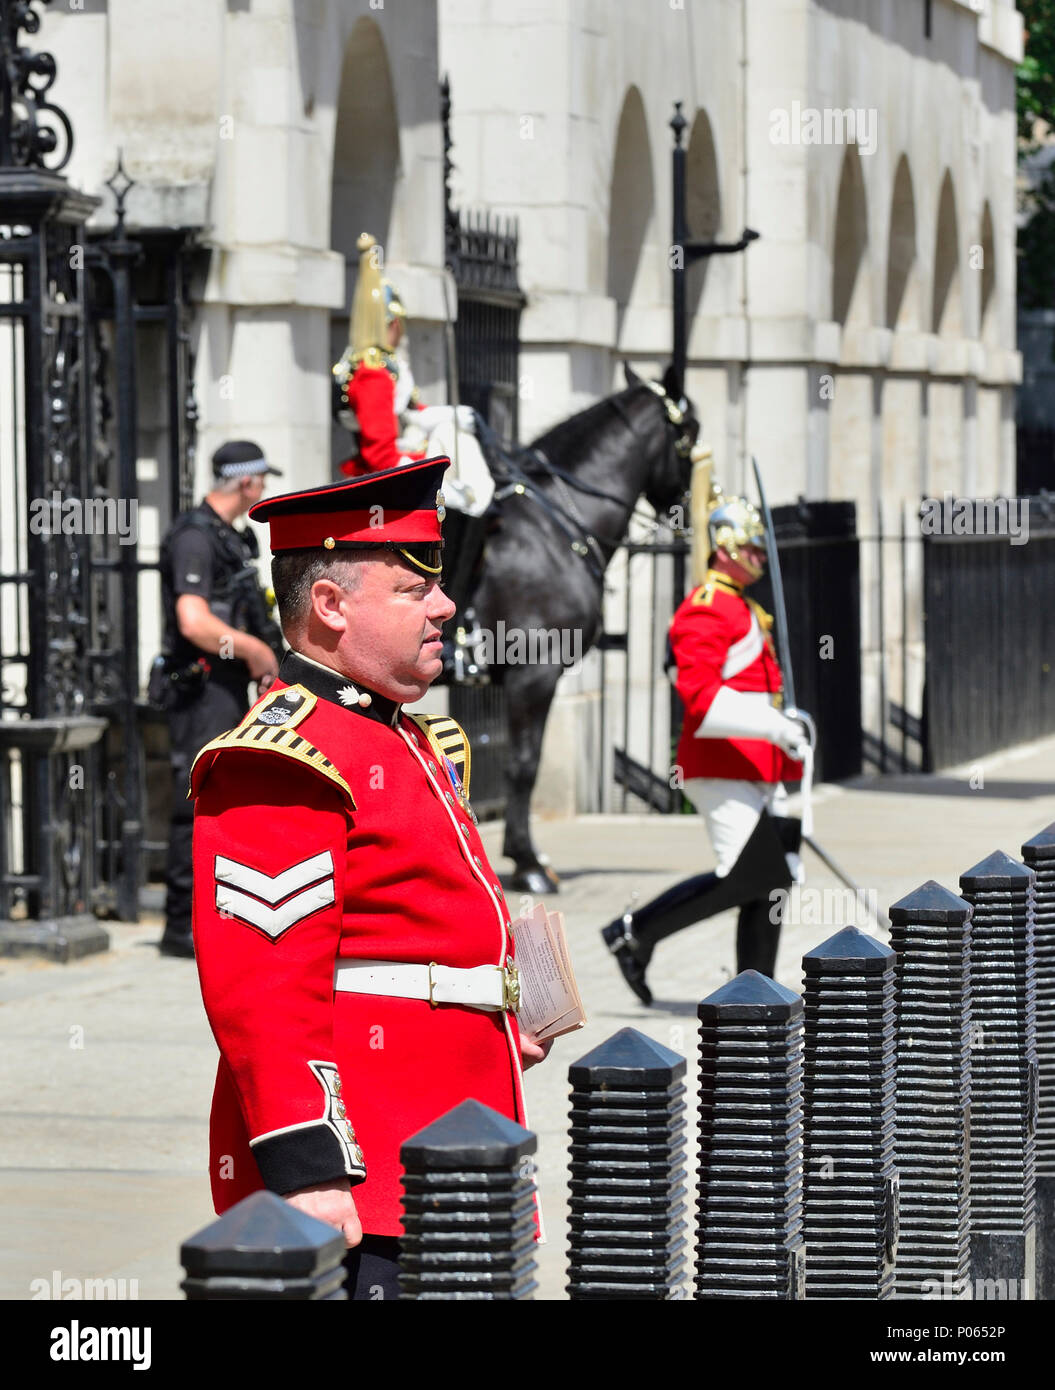 Member of the Grenadier Guards at the entrance to Horse Guards Parade, Whitehall, London, England, UK. Stock Photo